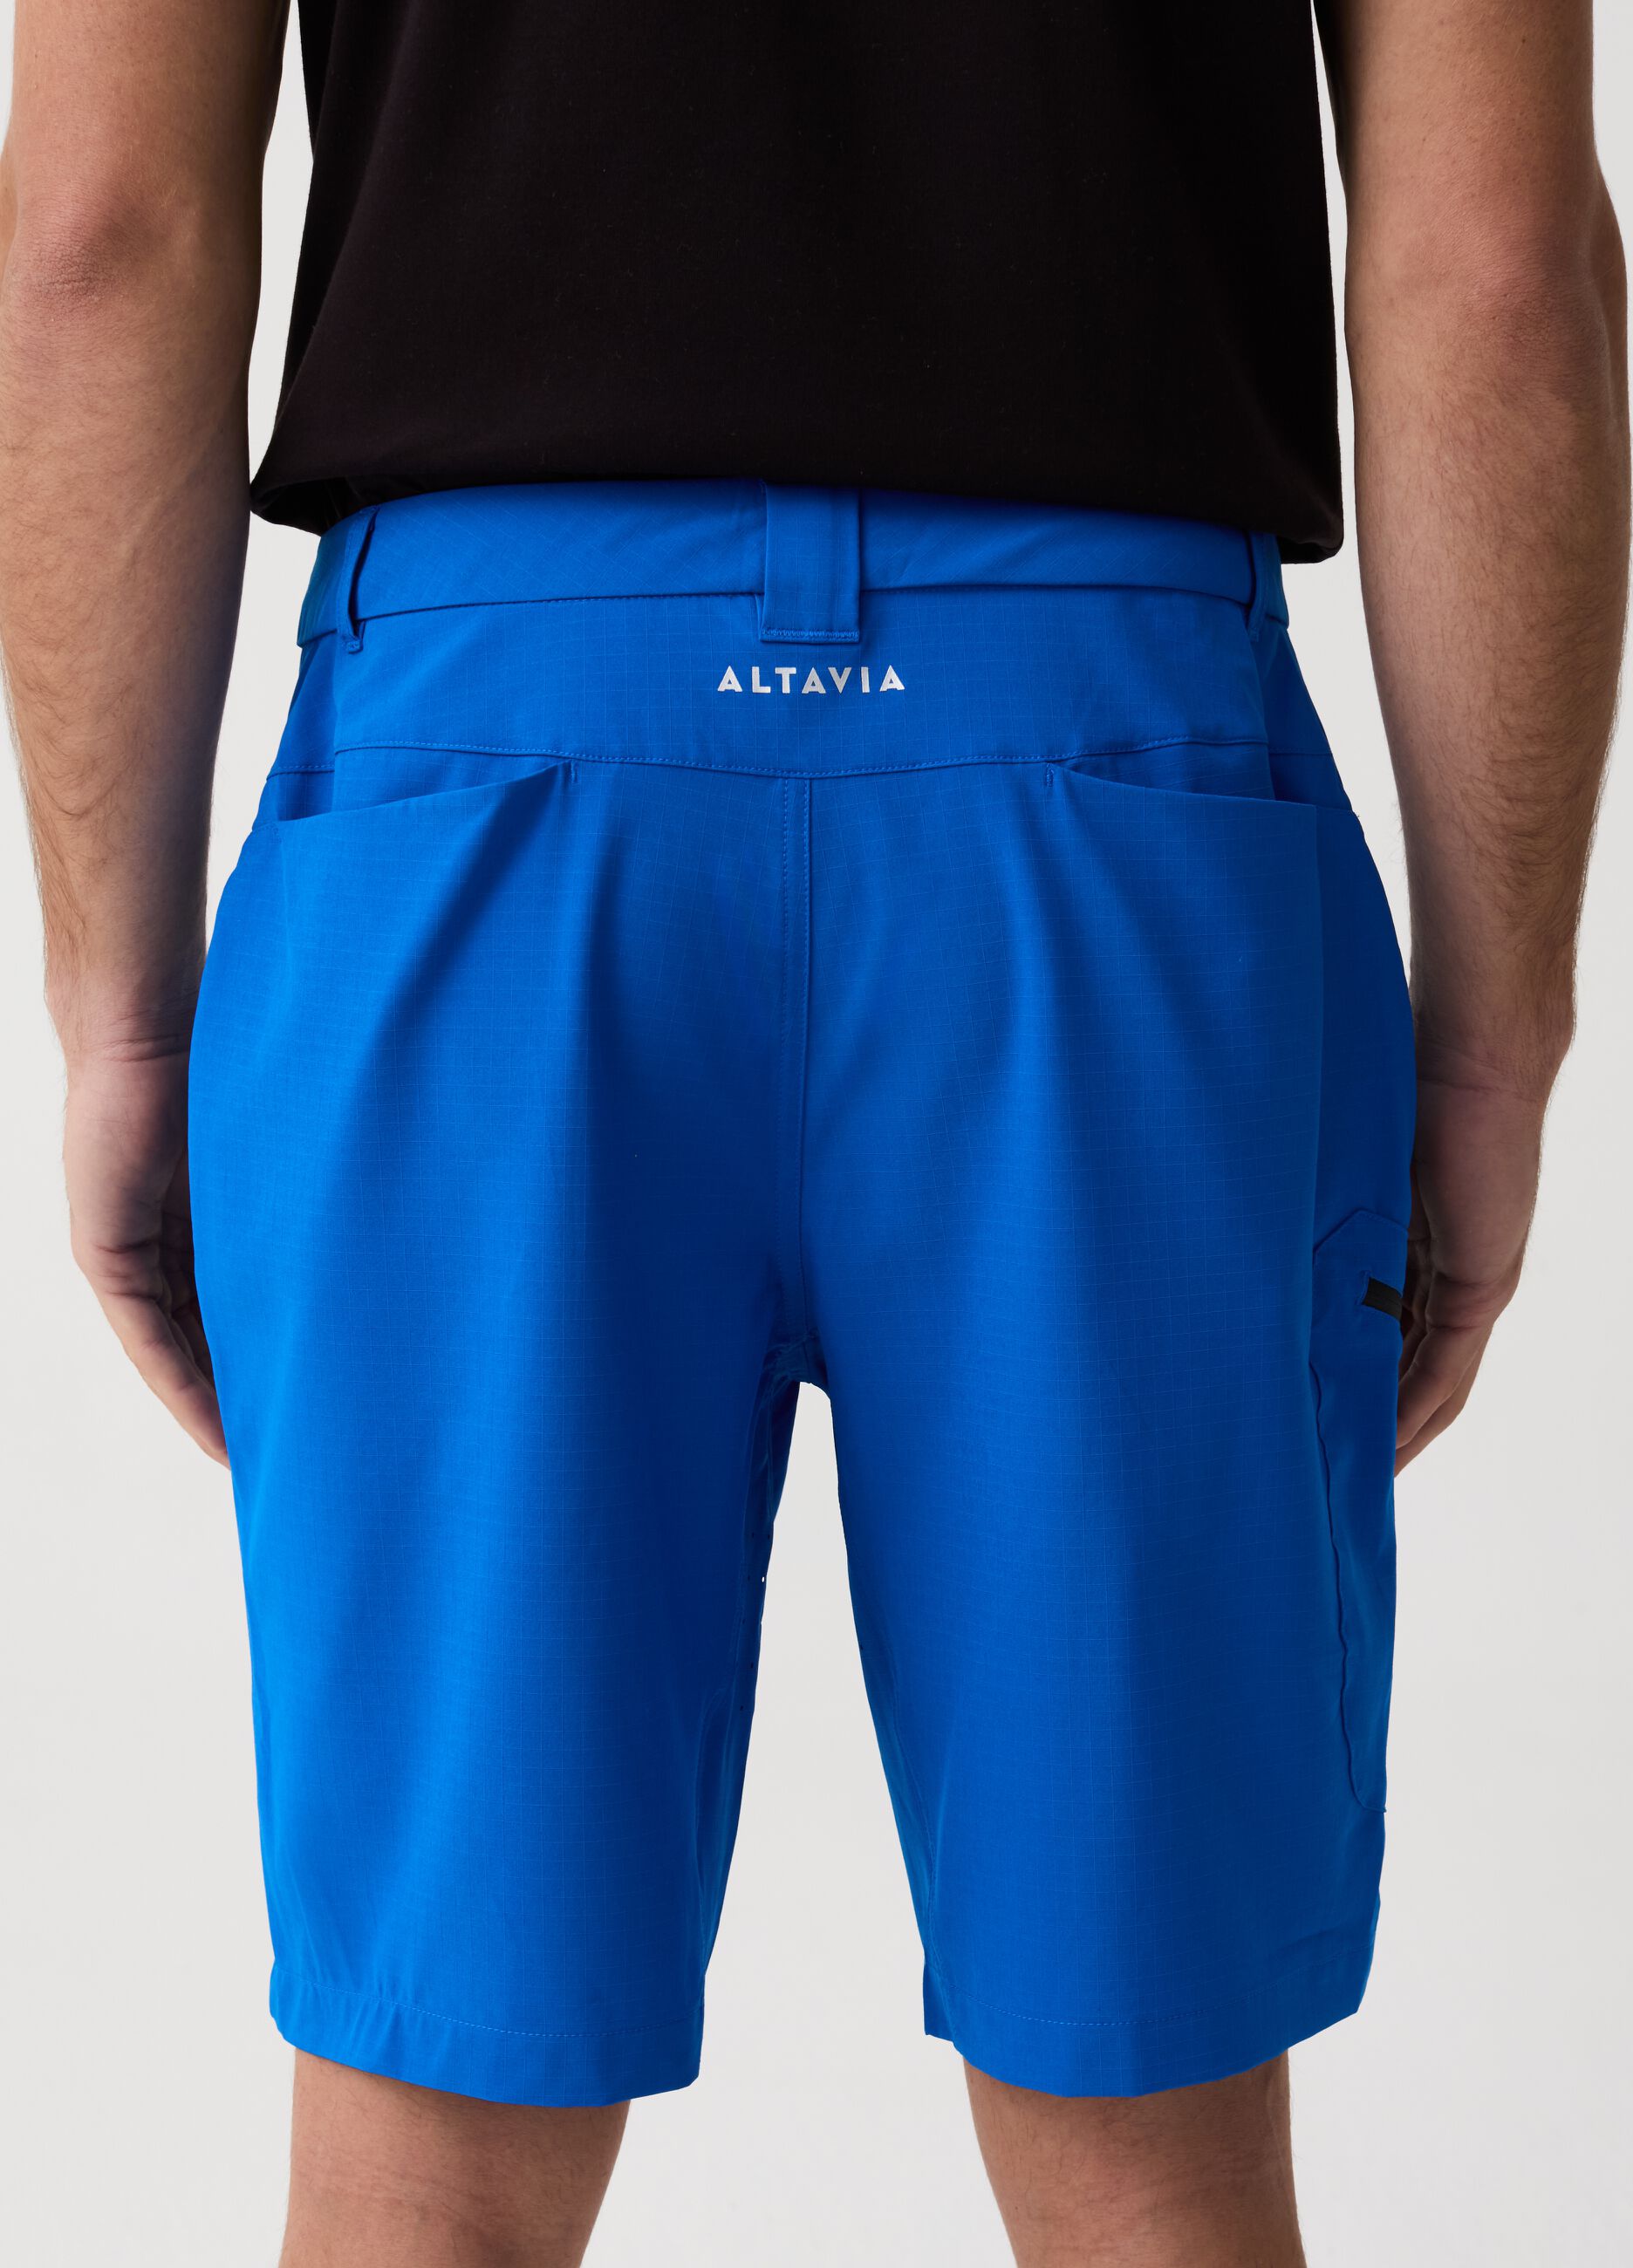 Altavia hiking shorts with ripstop weave